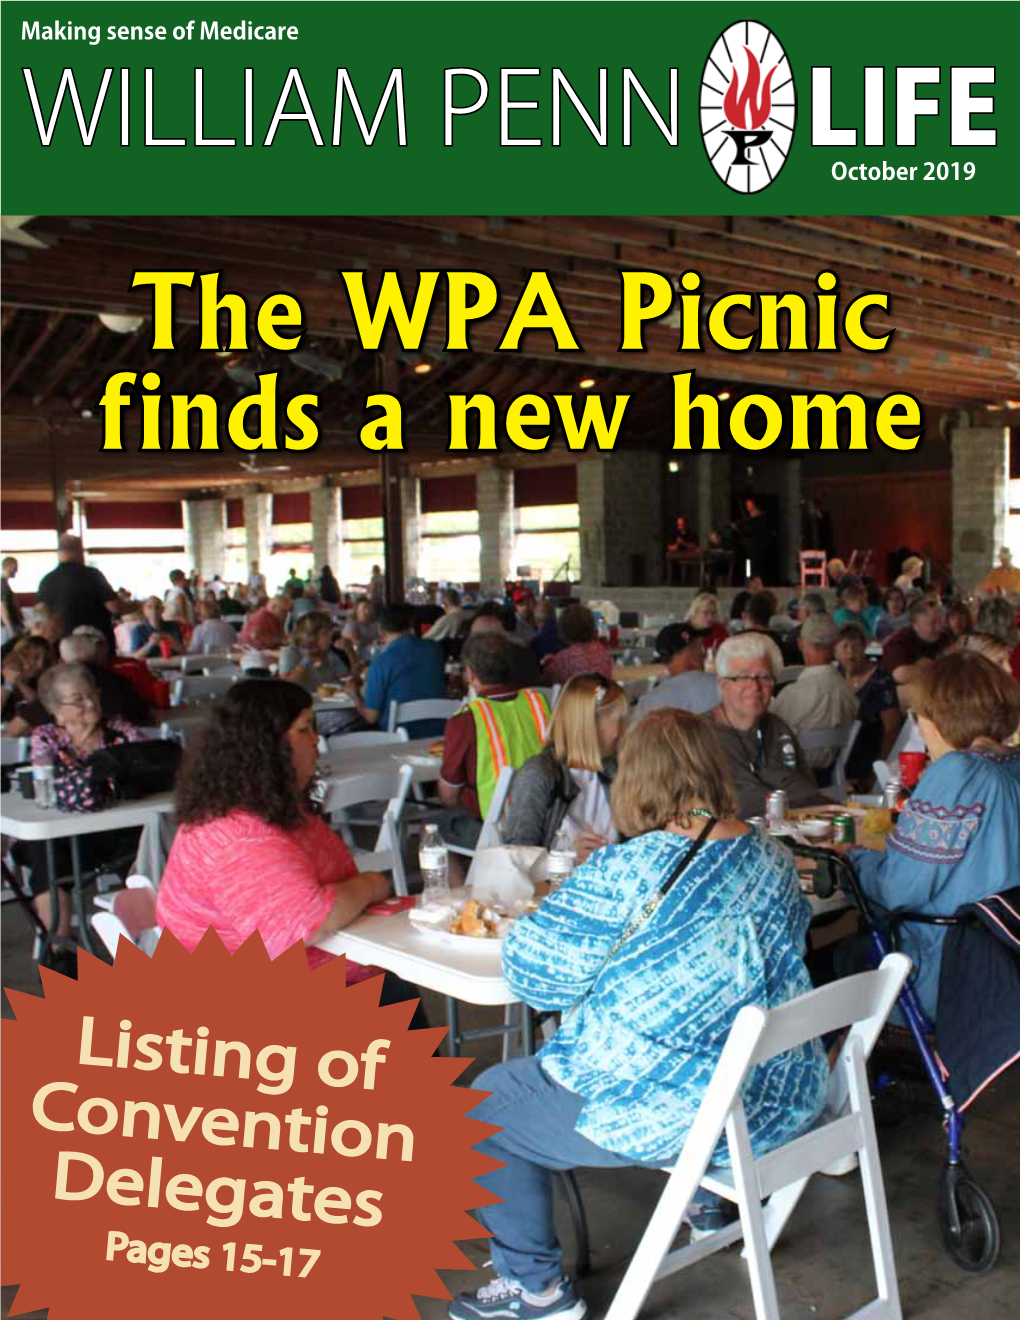 The WPA Picnic Finds a New Home